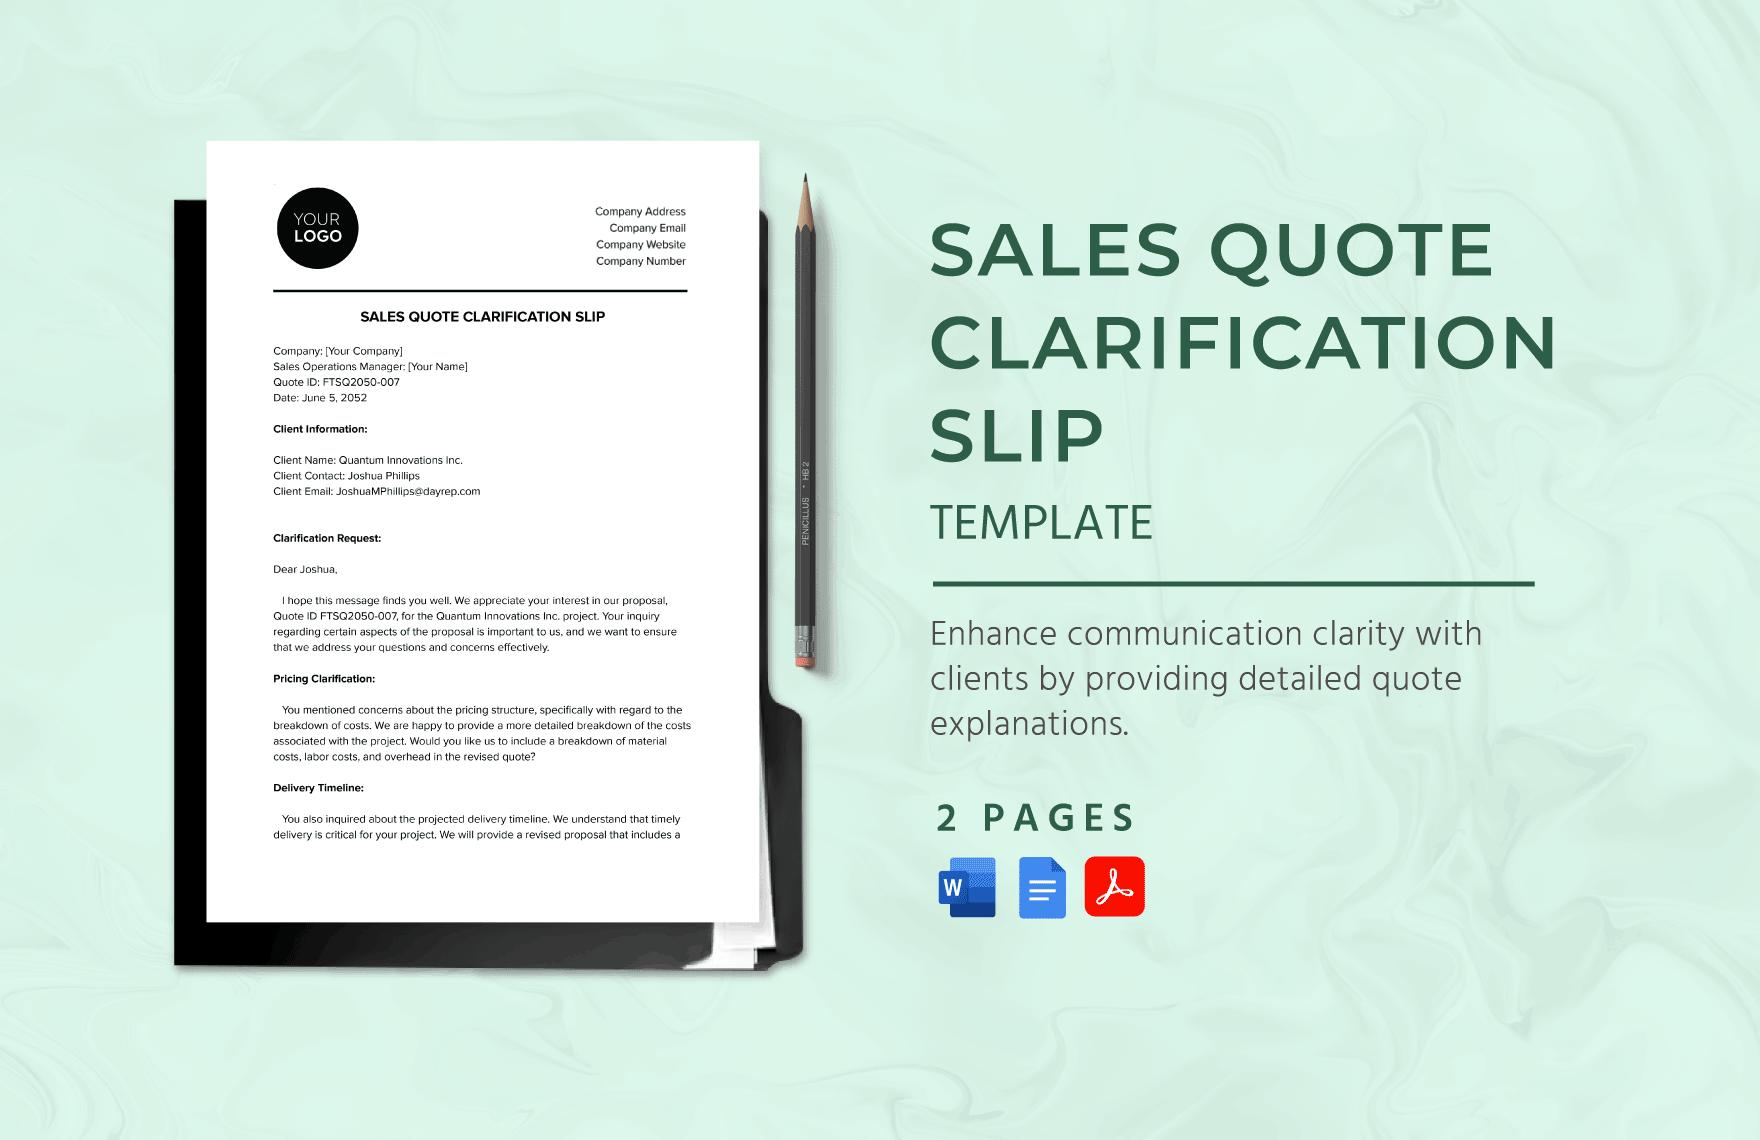 Sales Quote Clarification Slip Template in Word, Google Docs, PDF